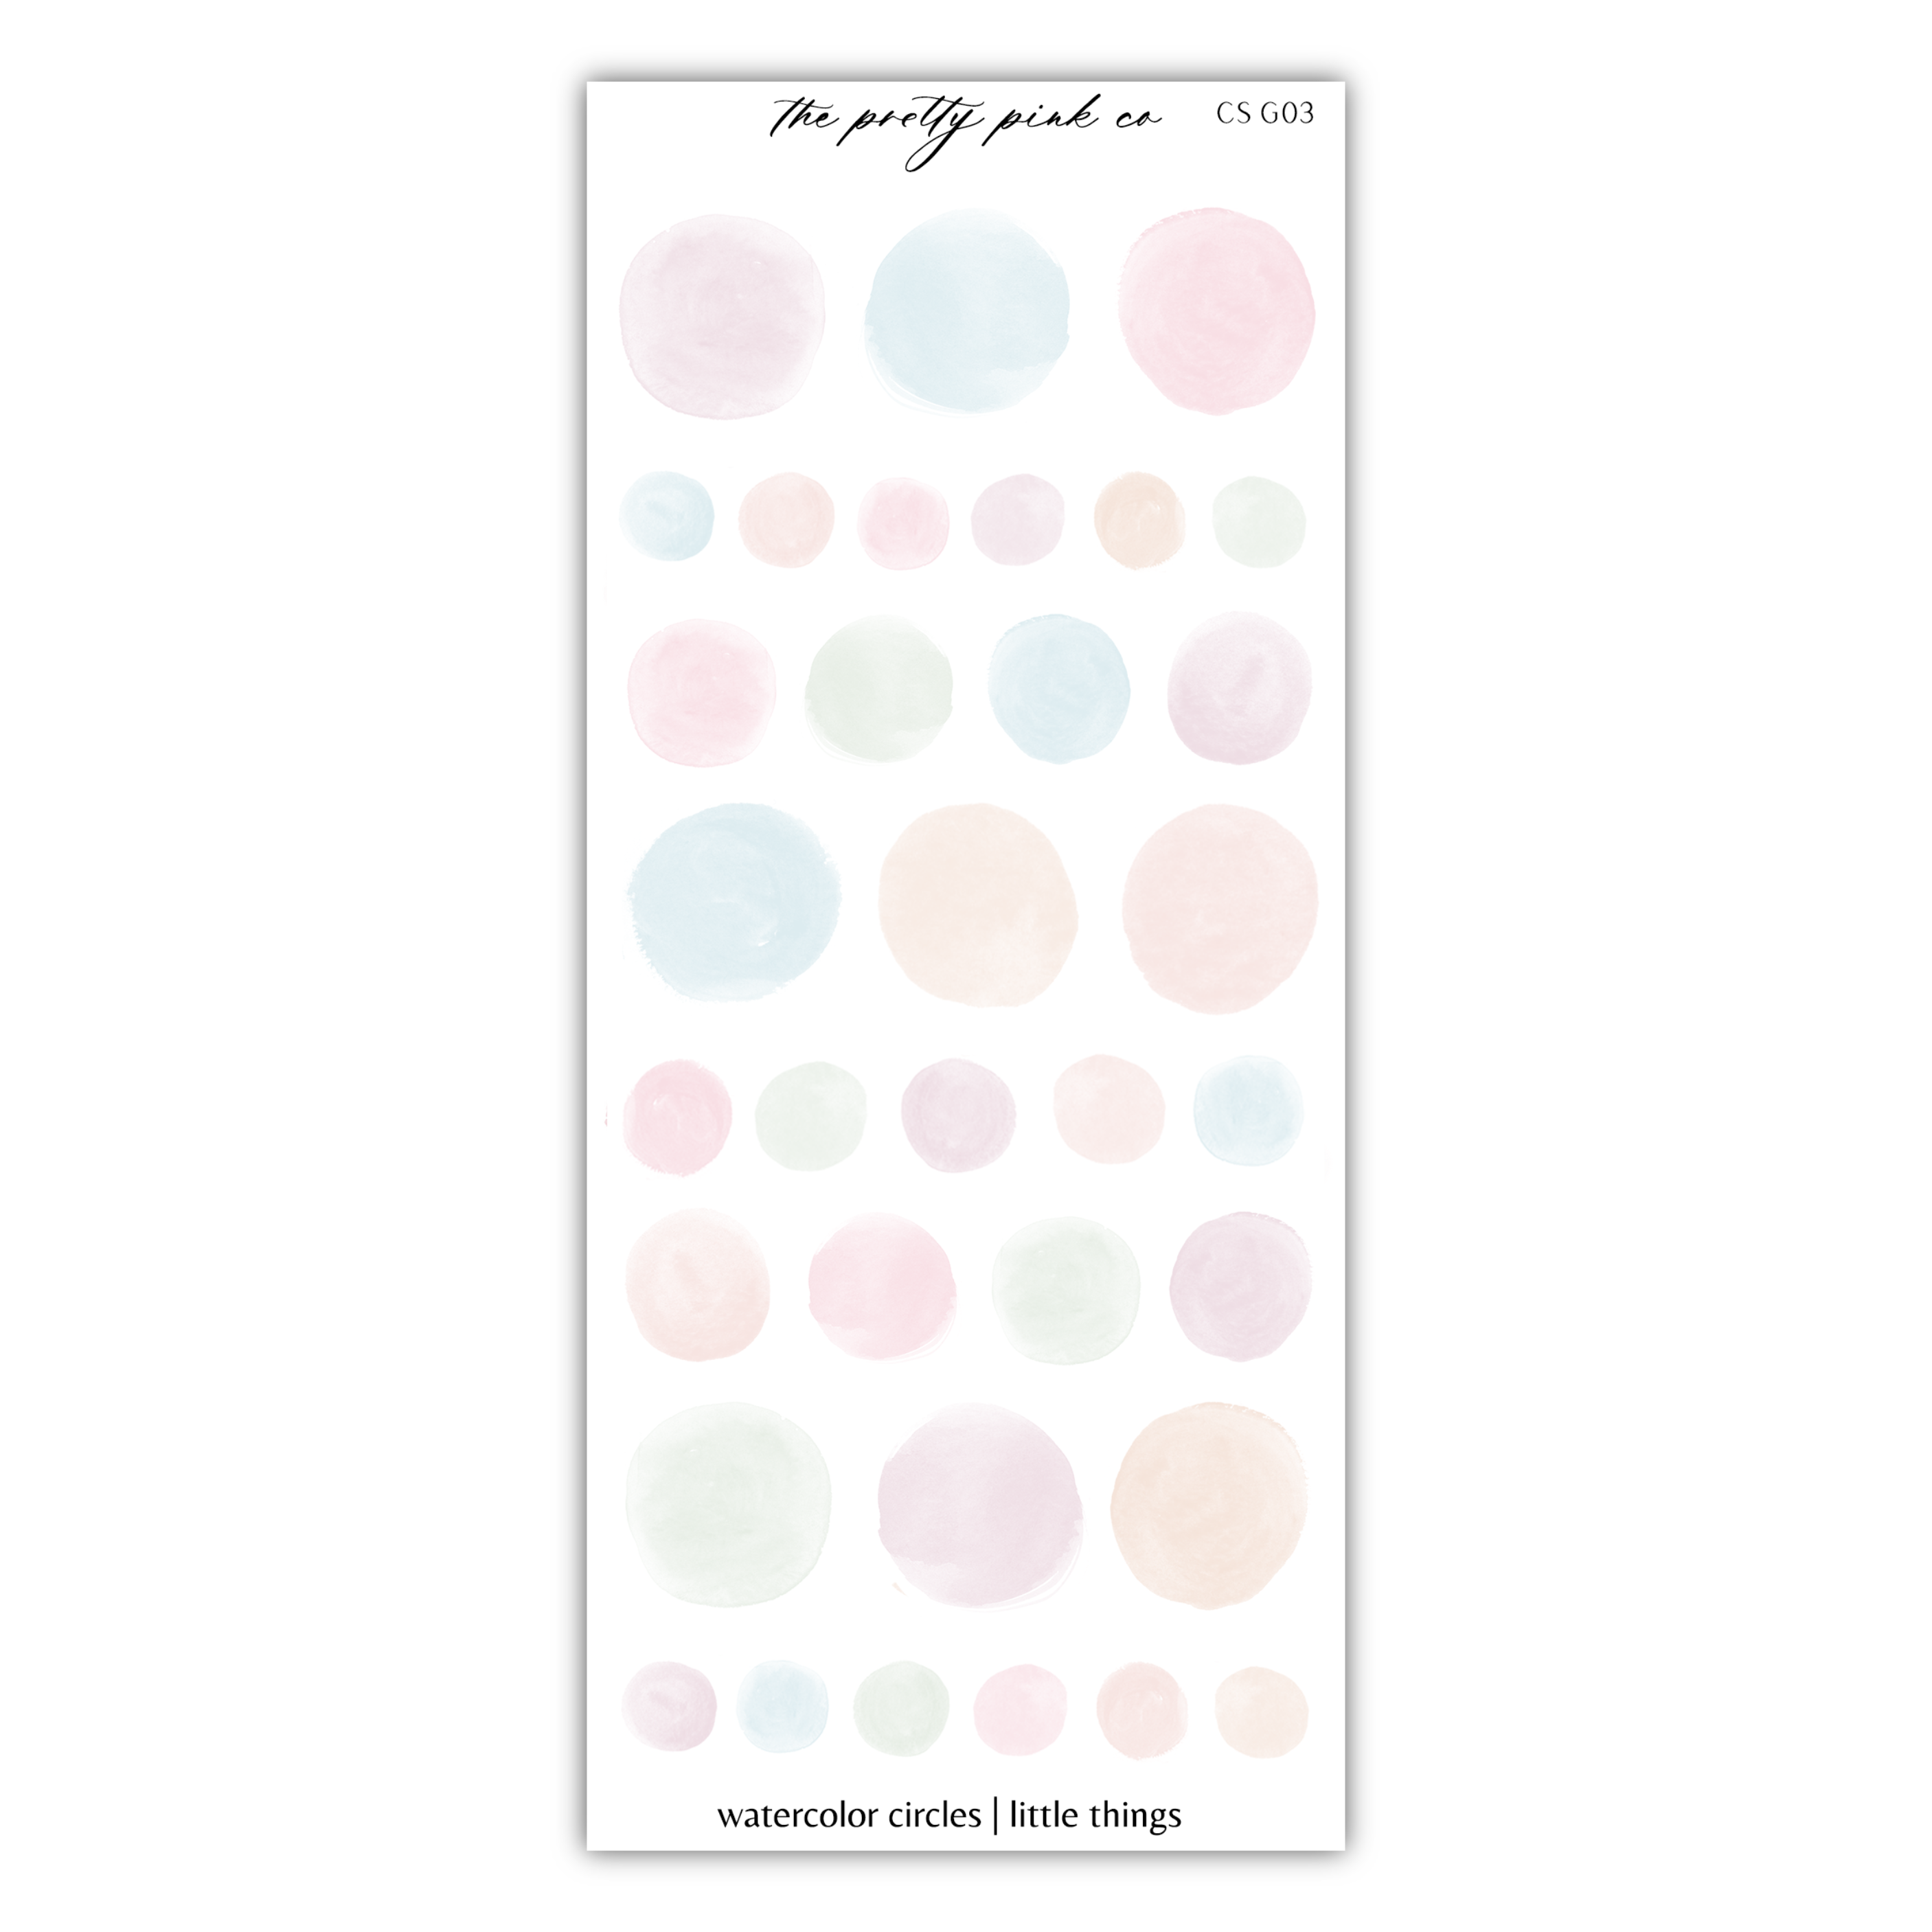 a pink and blue polka dot sticker on a white background